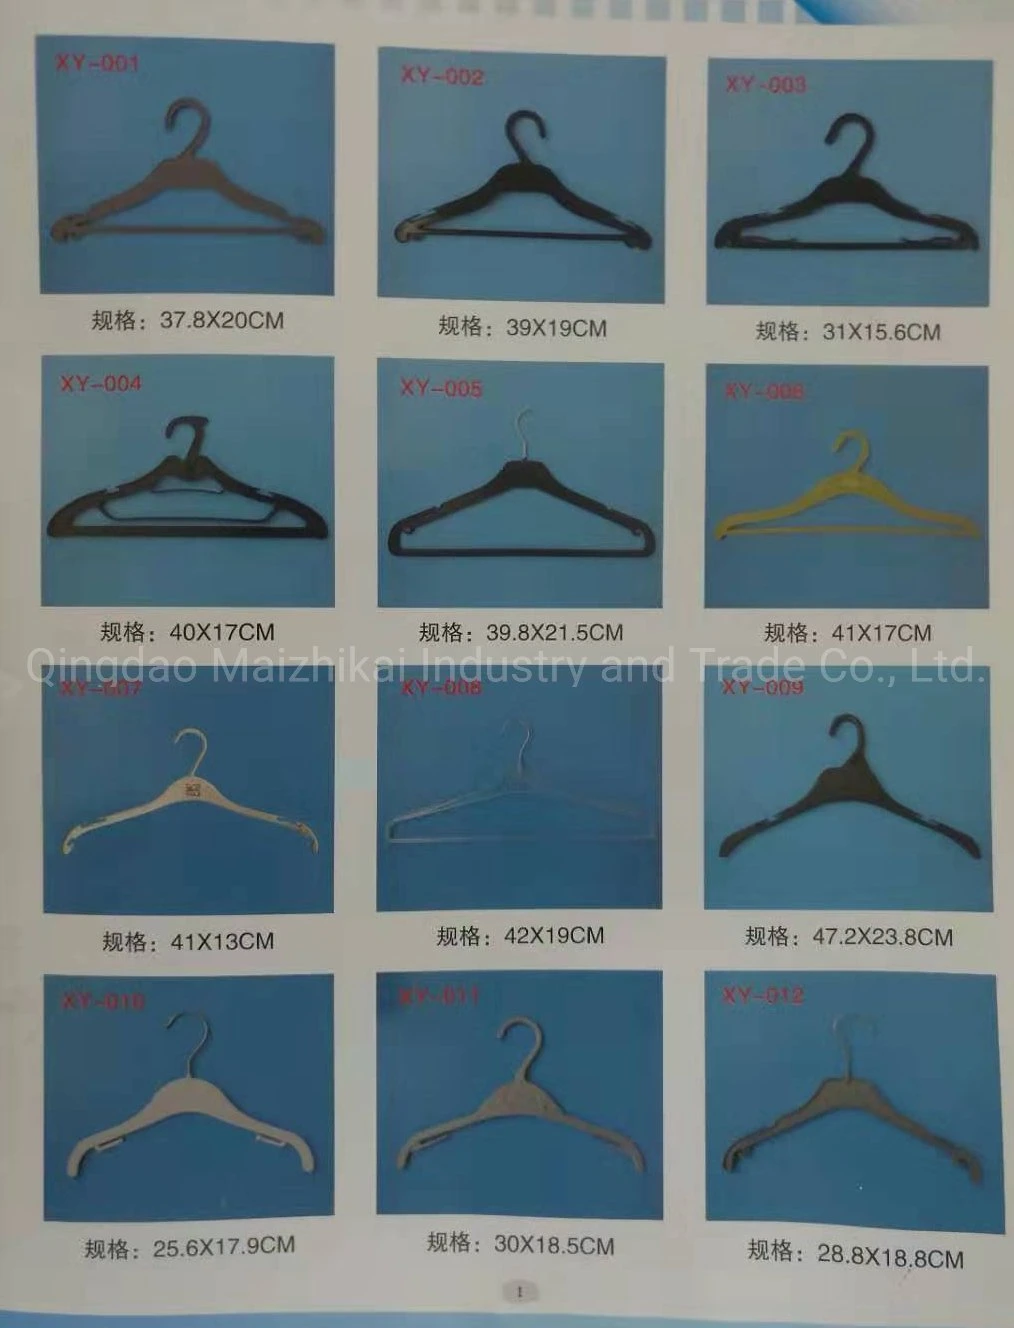 Garment /Cloth /Display /Laundry Plastic Pants Hanger in China Factory